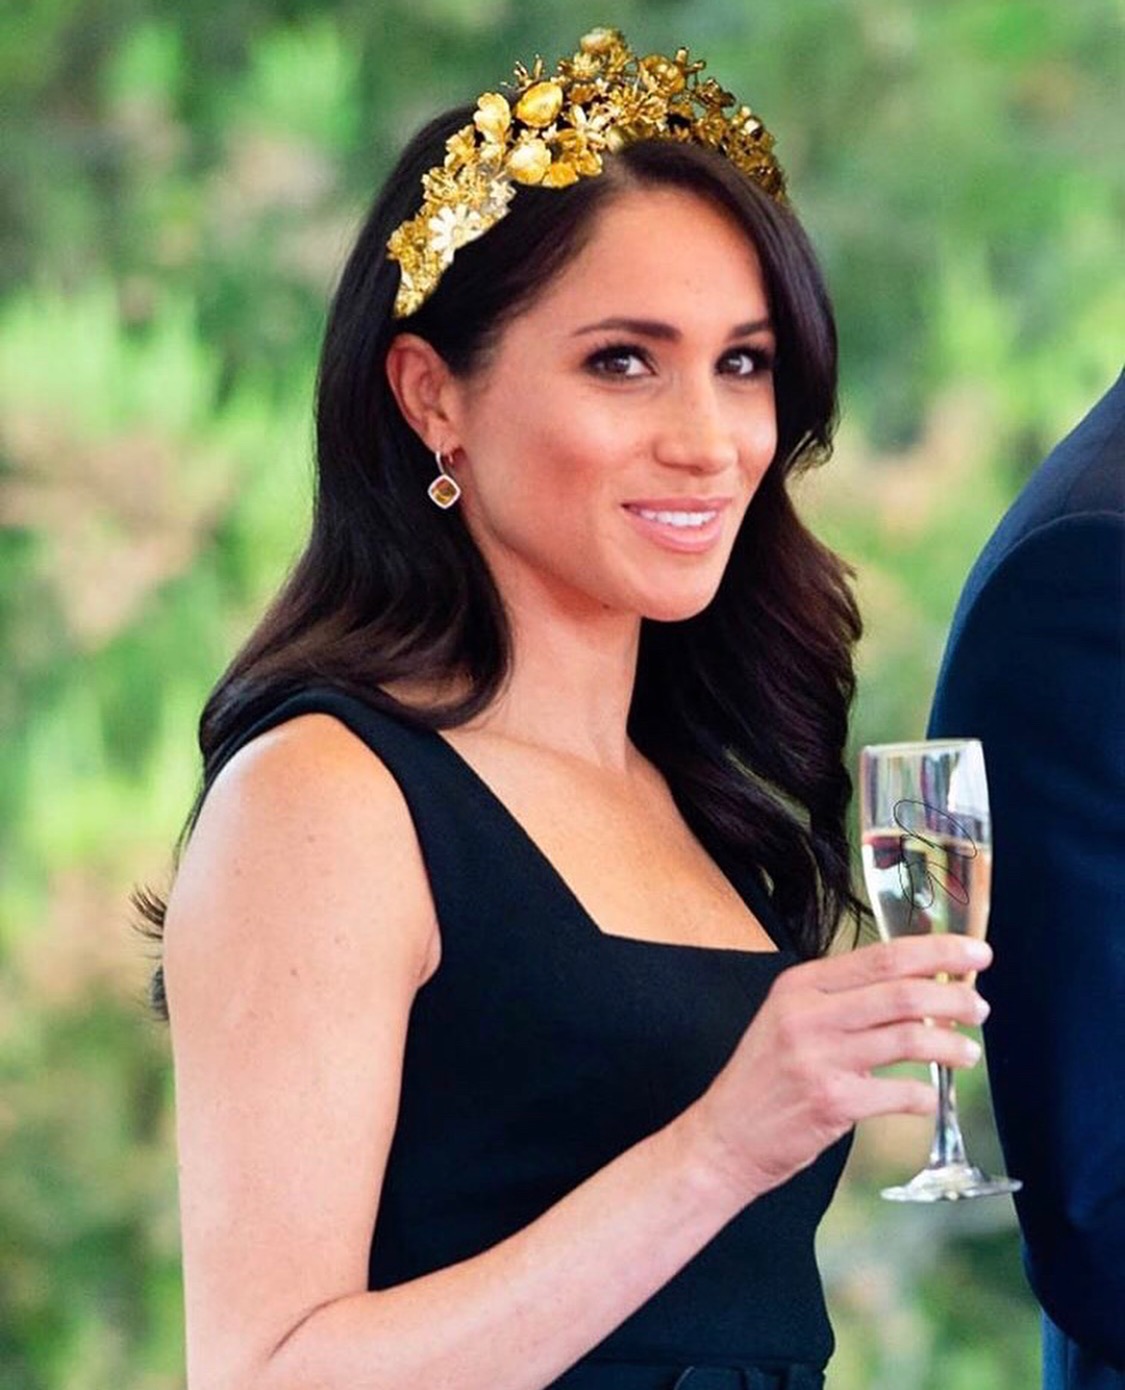 See How the Royal Family Wished Meghan Markle a Happy Birthday